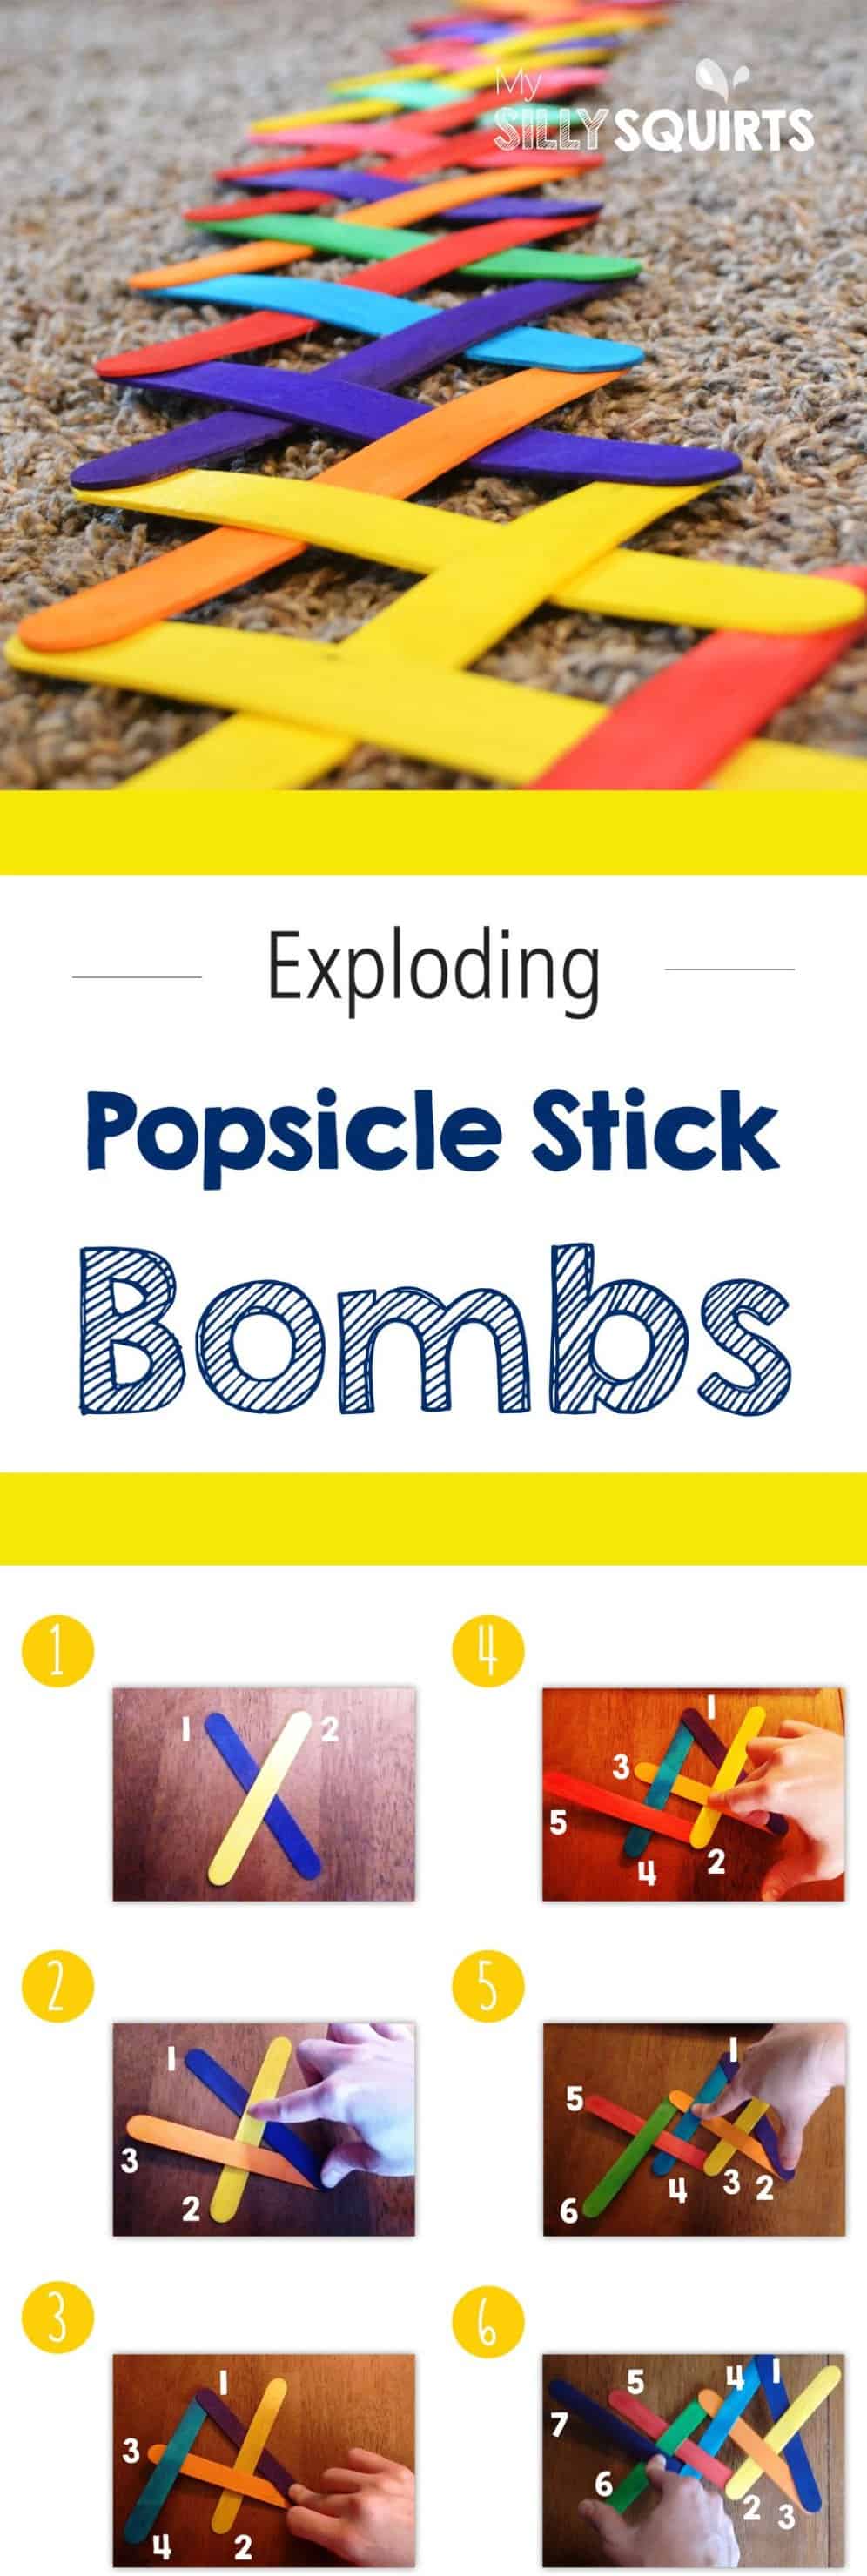 Popsicle stick bombs